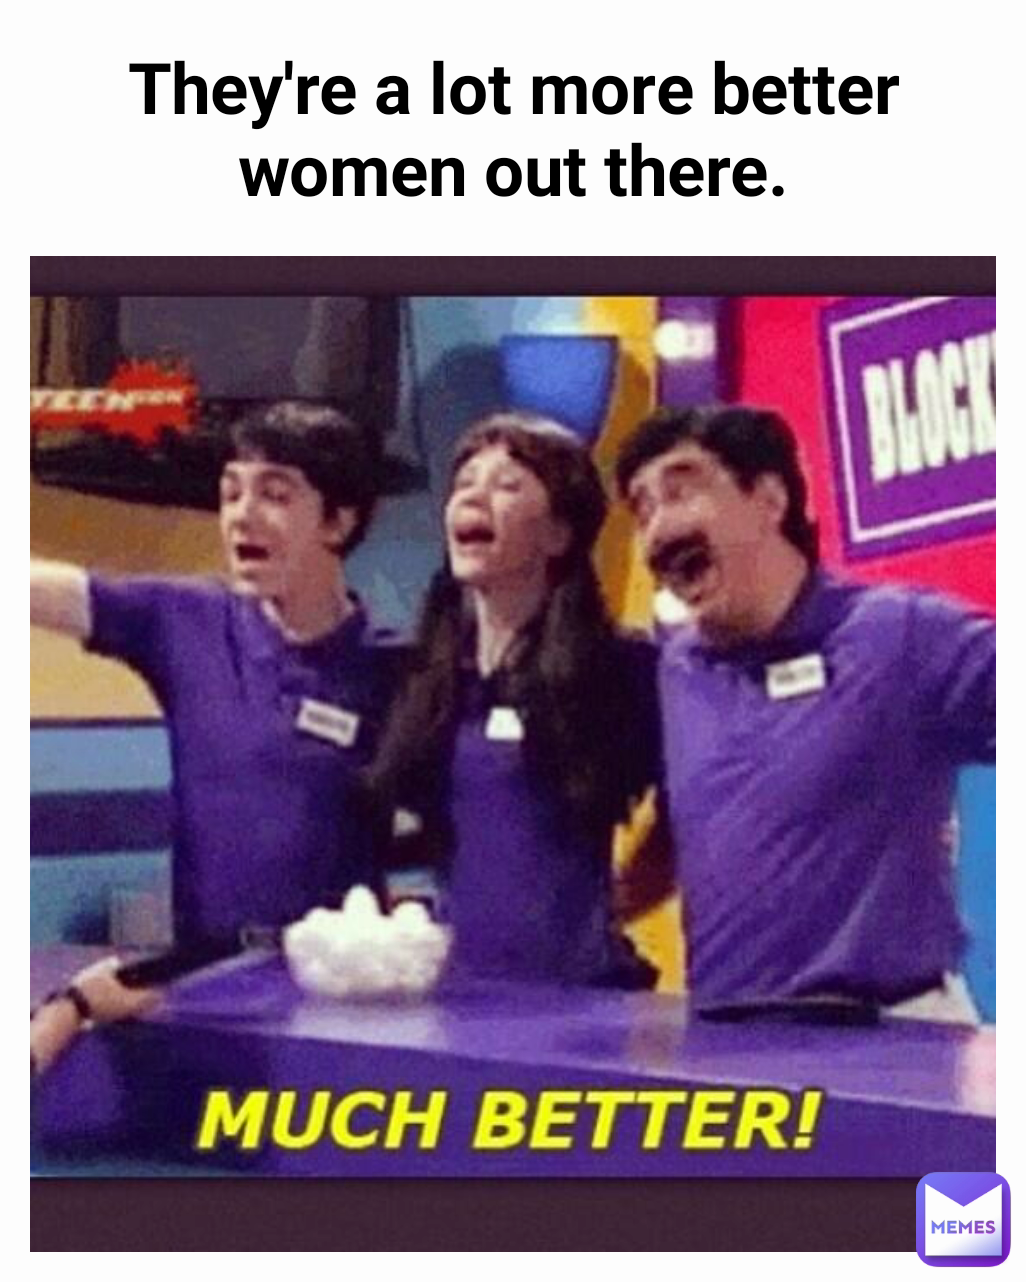 They're a lot more better women out there.